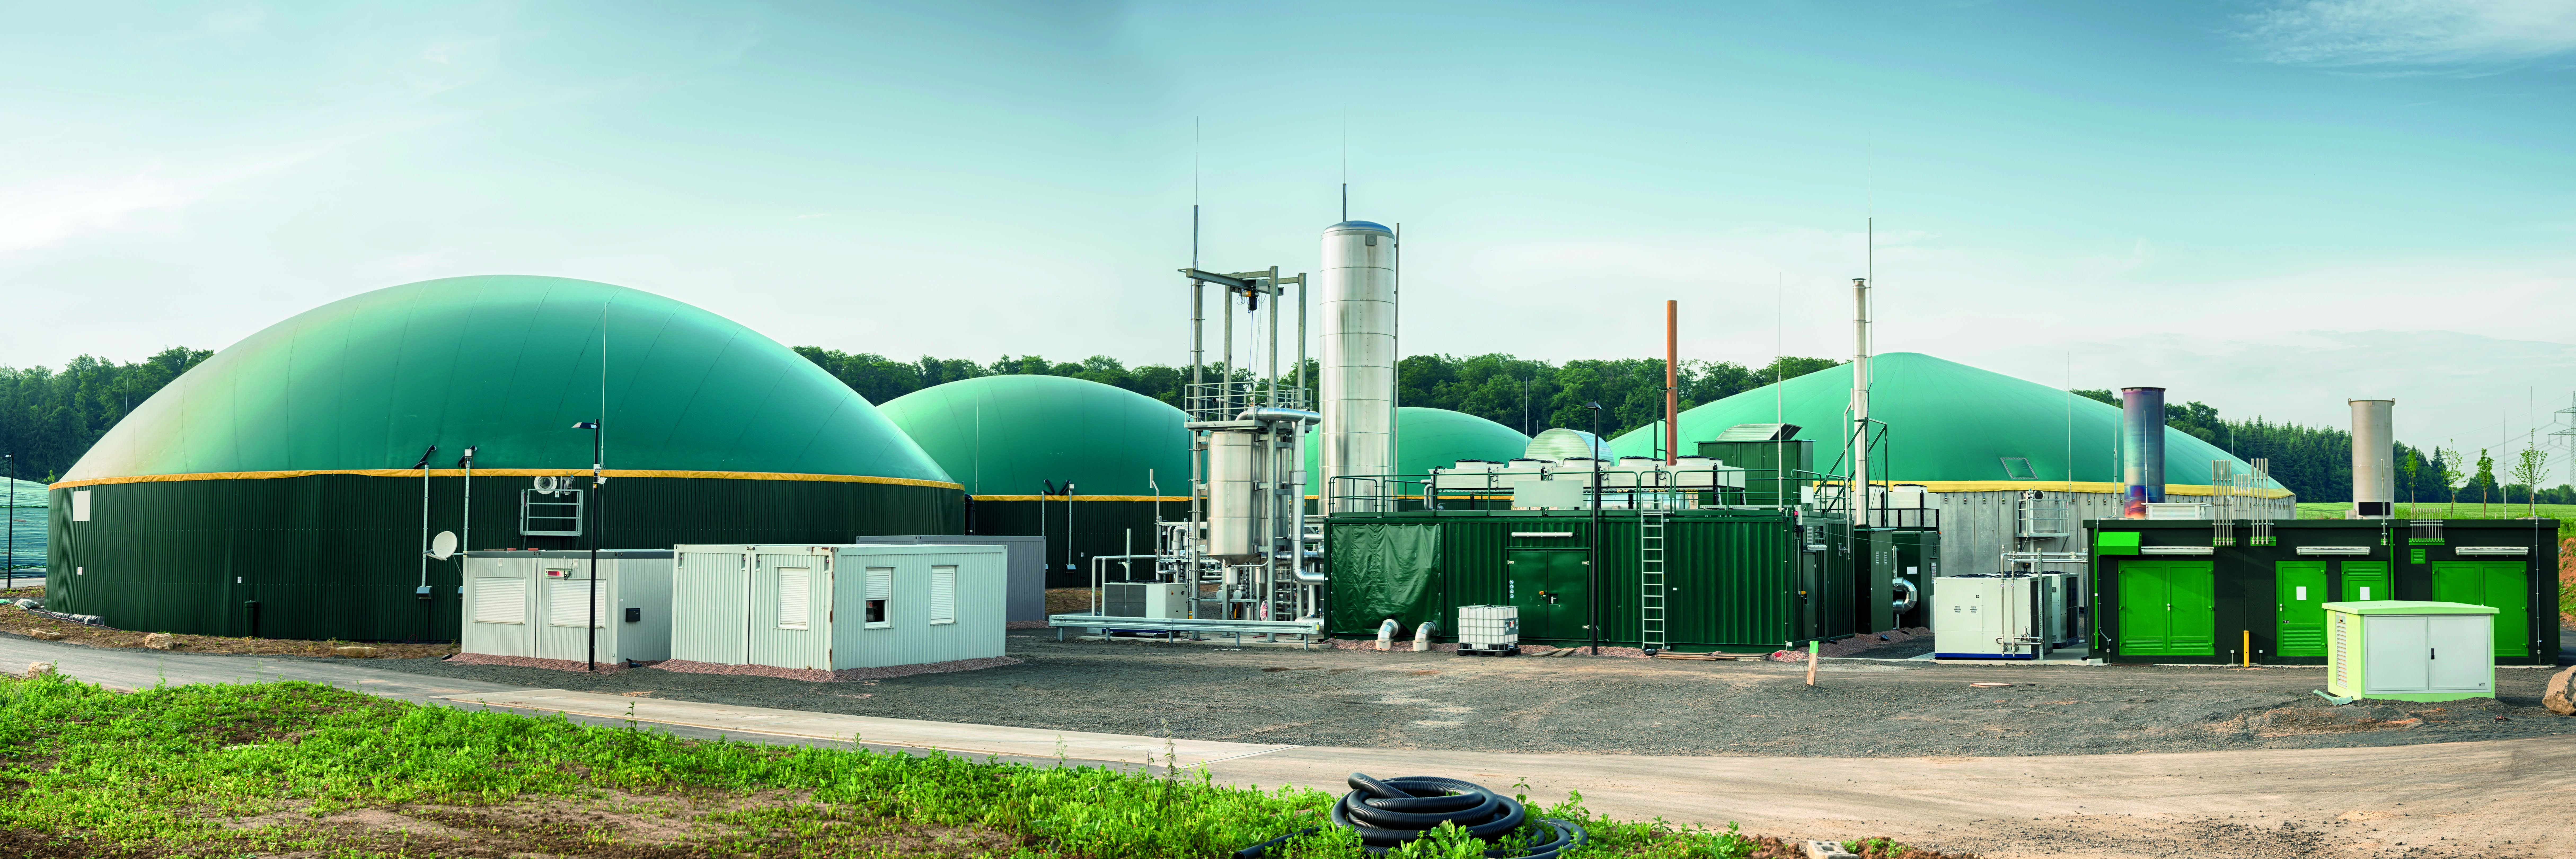 Panoramashot of a biogas plant in a rural landscape